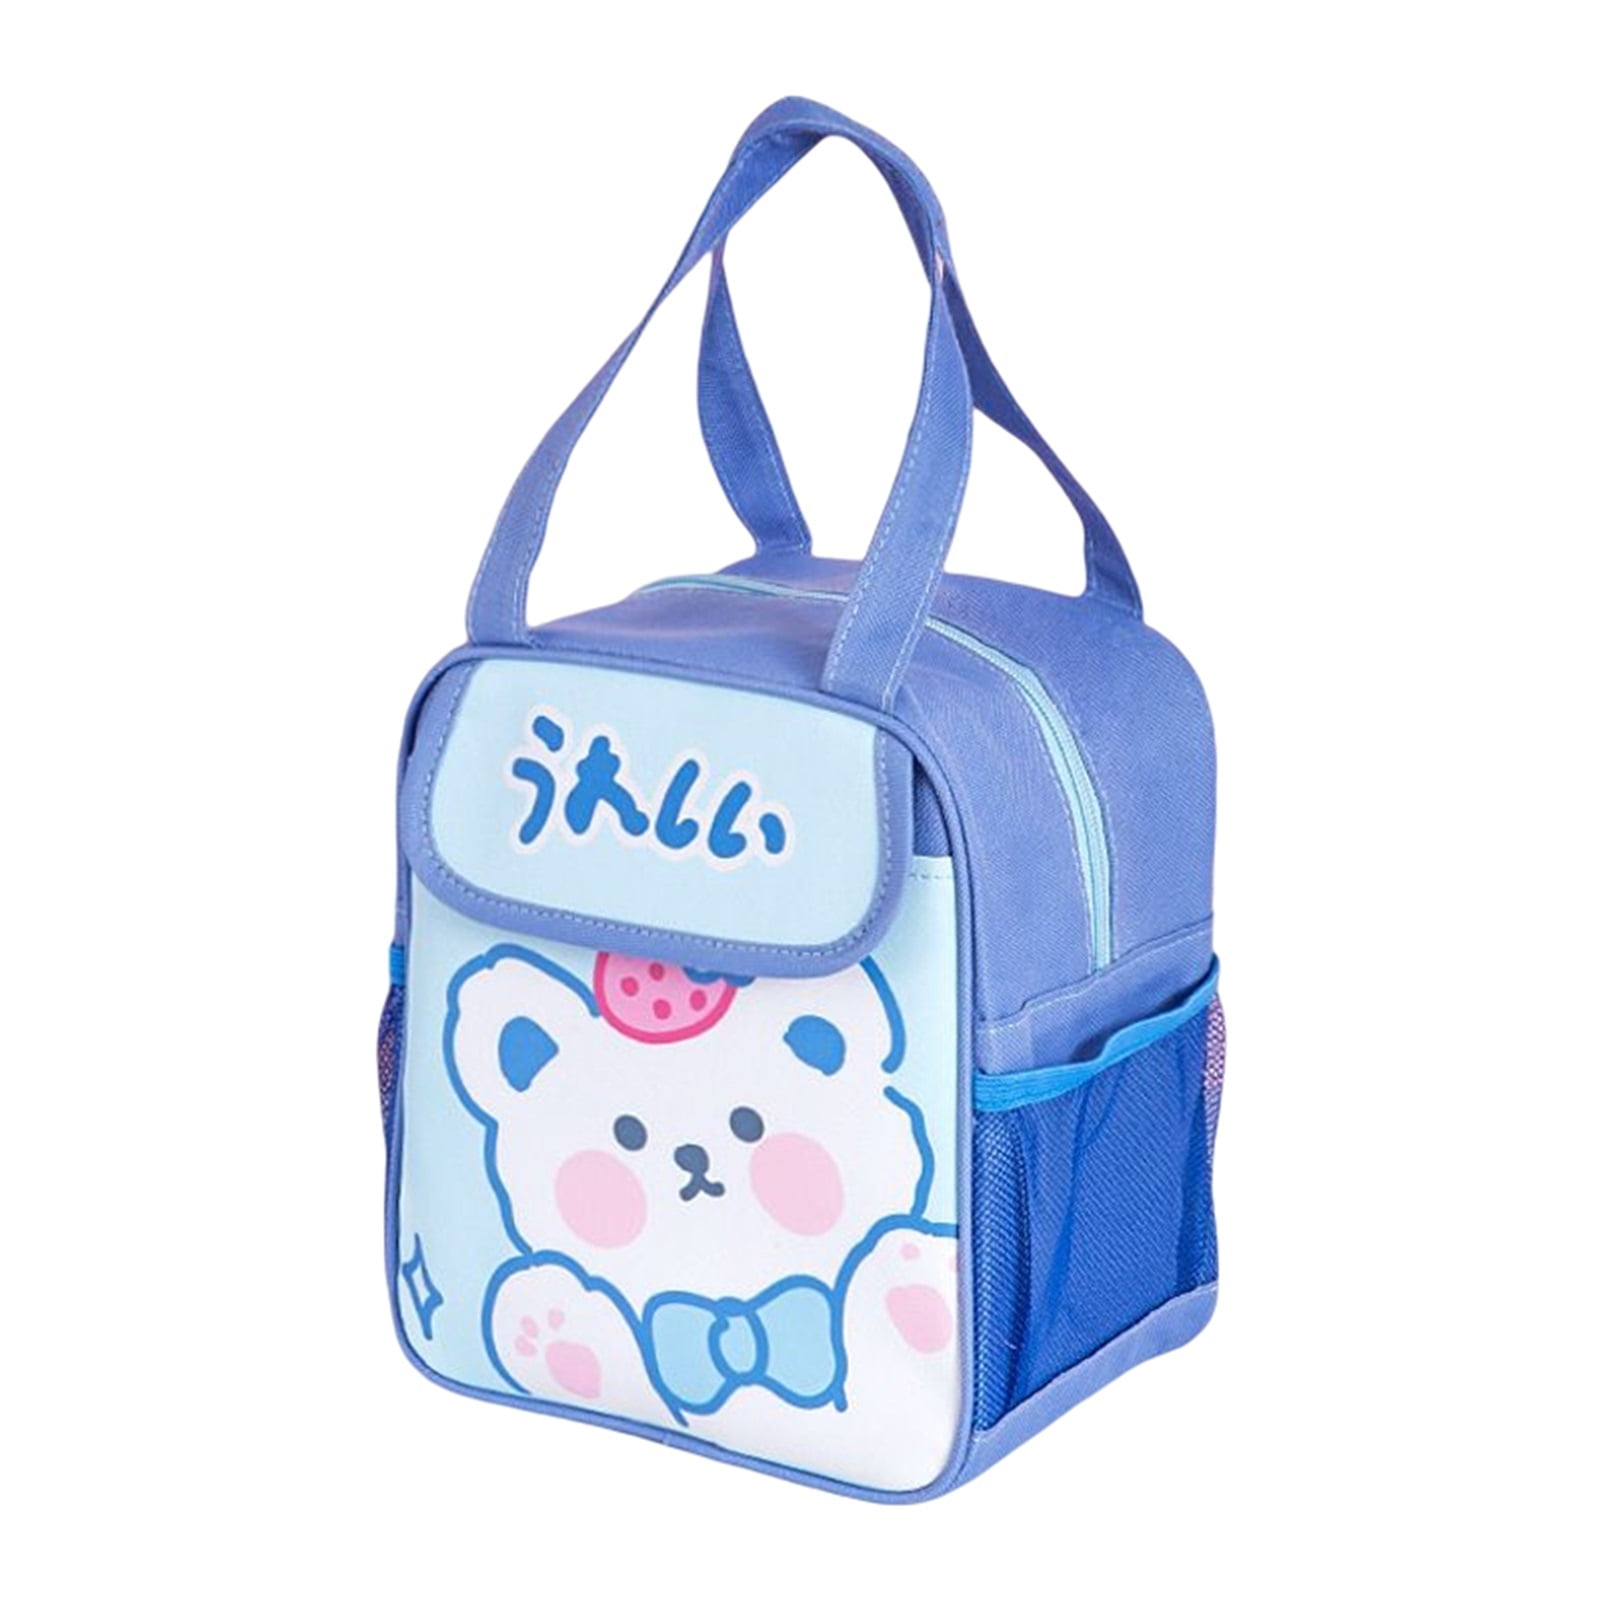 Mqing Lunch Bag Multiple Pockets Large Capacity Portable Girl Lunch Box Cute Insulated Bento Bag for Office School, Adult Unisex, Purple